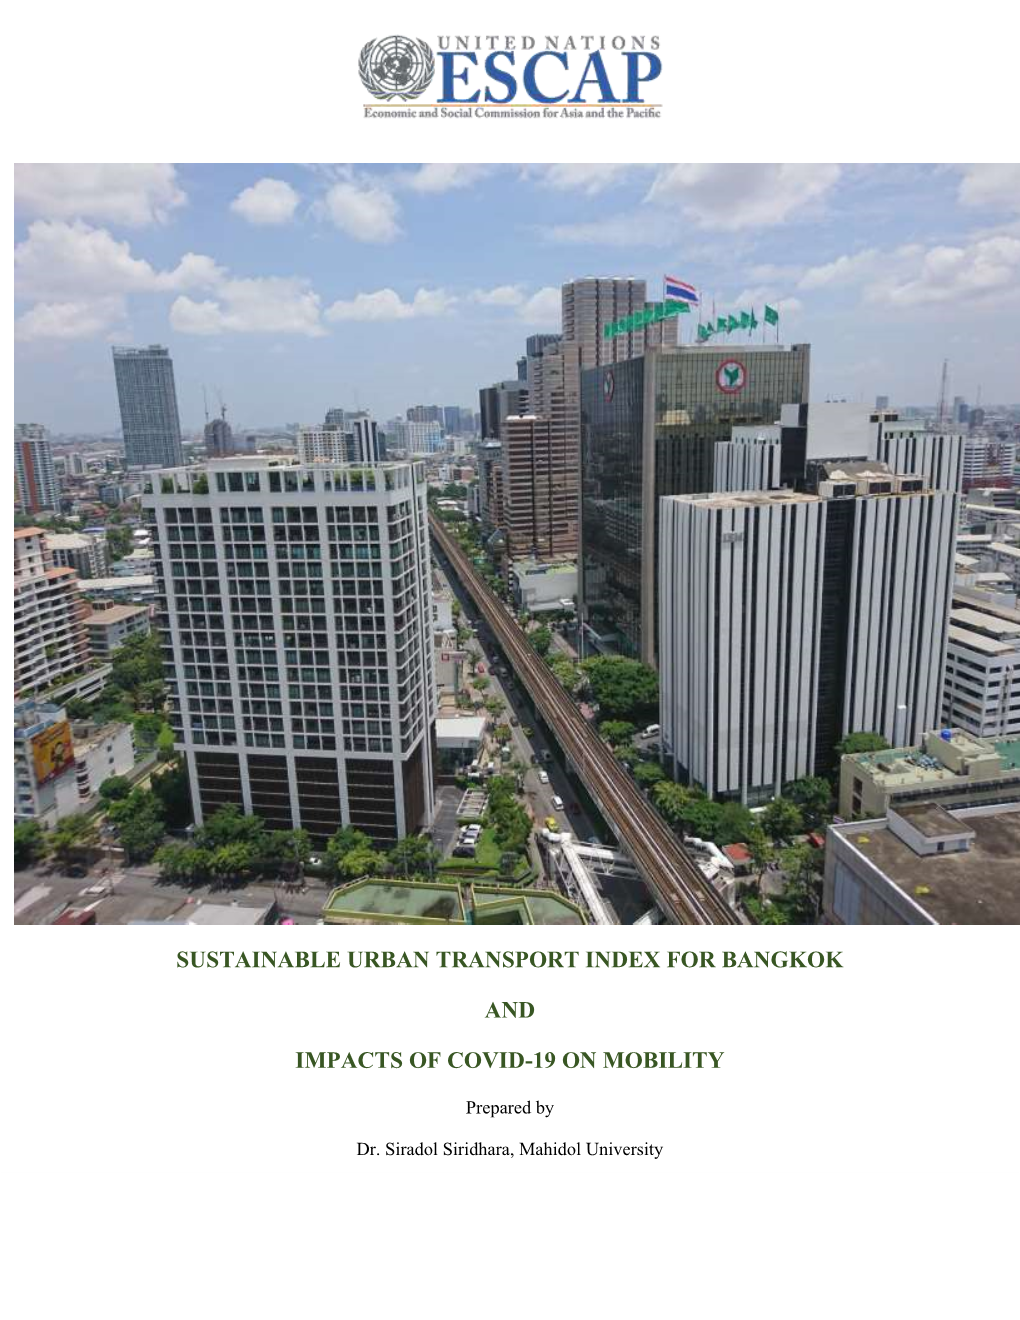 Sustainable Urban Transport Index for Bangkok and Impacts of Covid-19